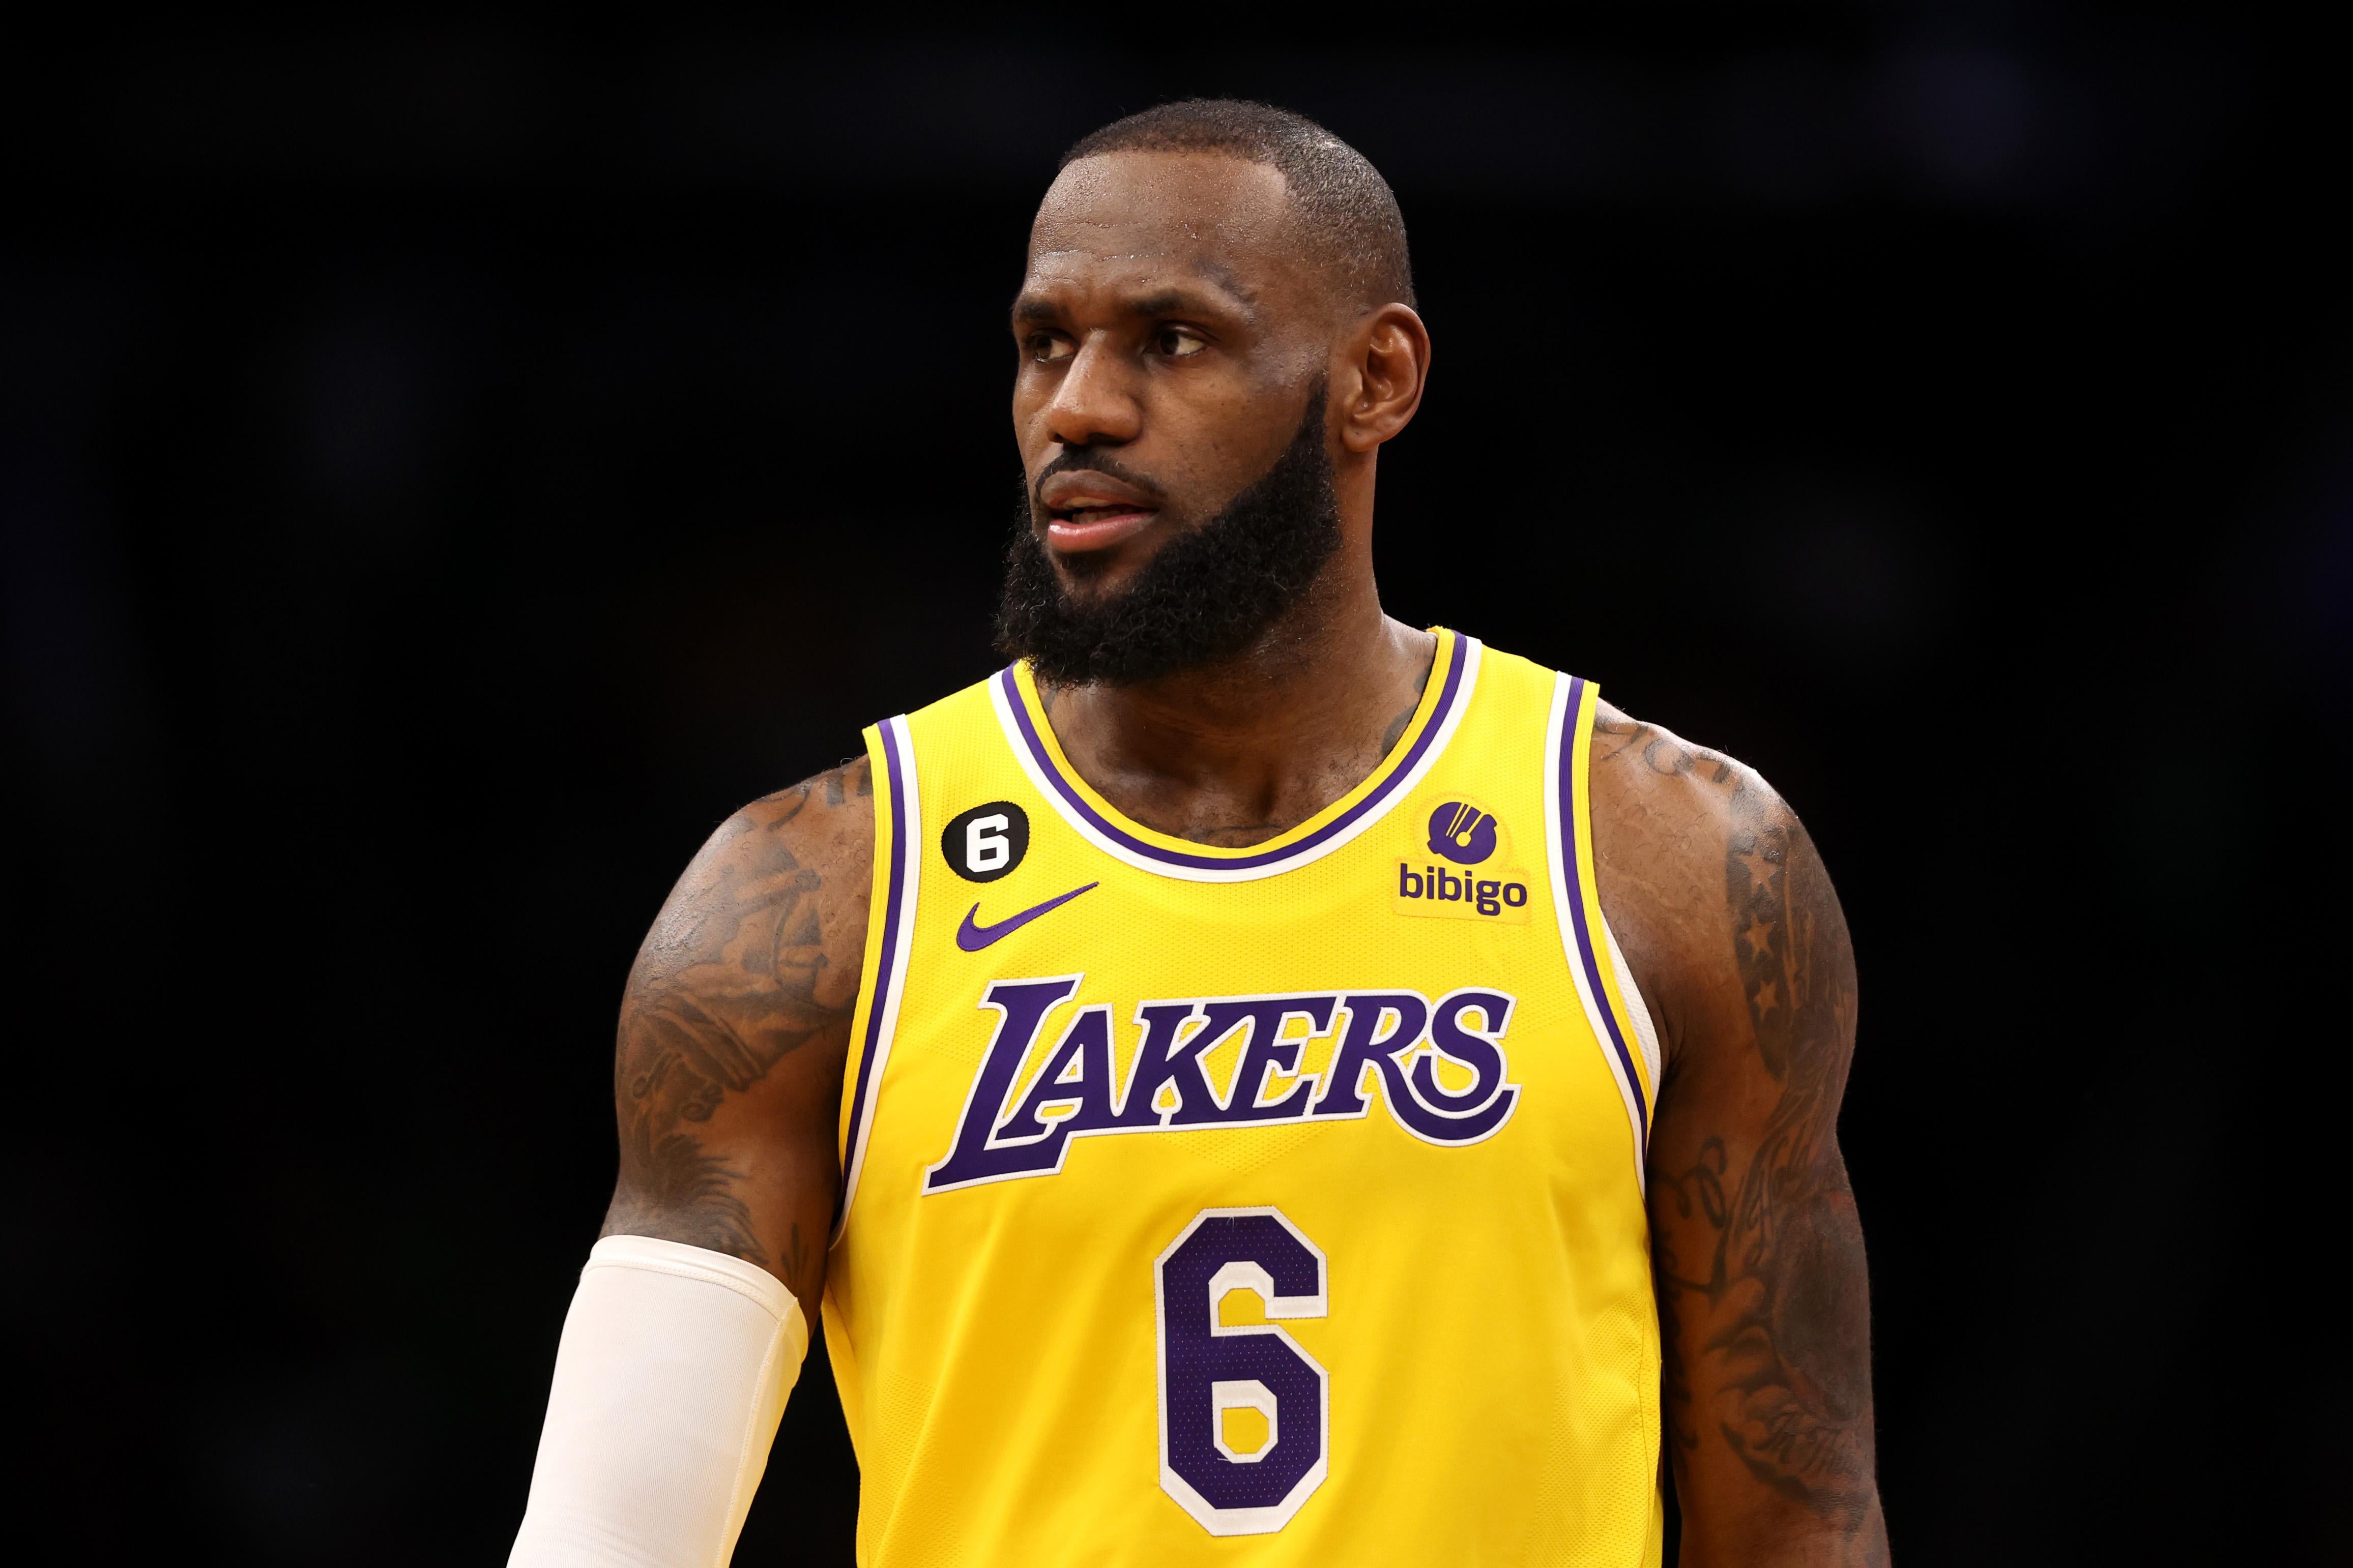 This Is No Way for LeBron James to Finish His Career. He Has Another Option. Jack Hamilton